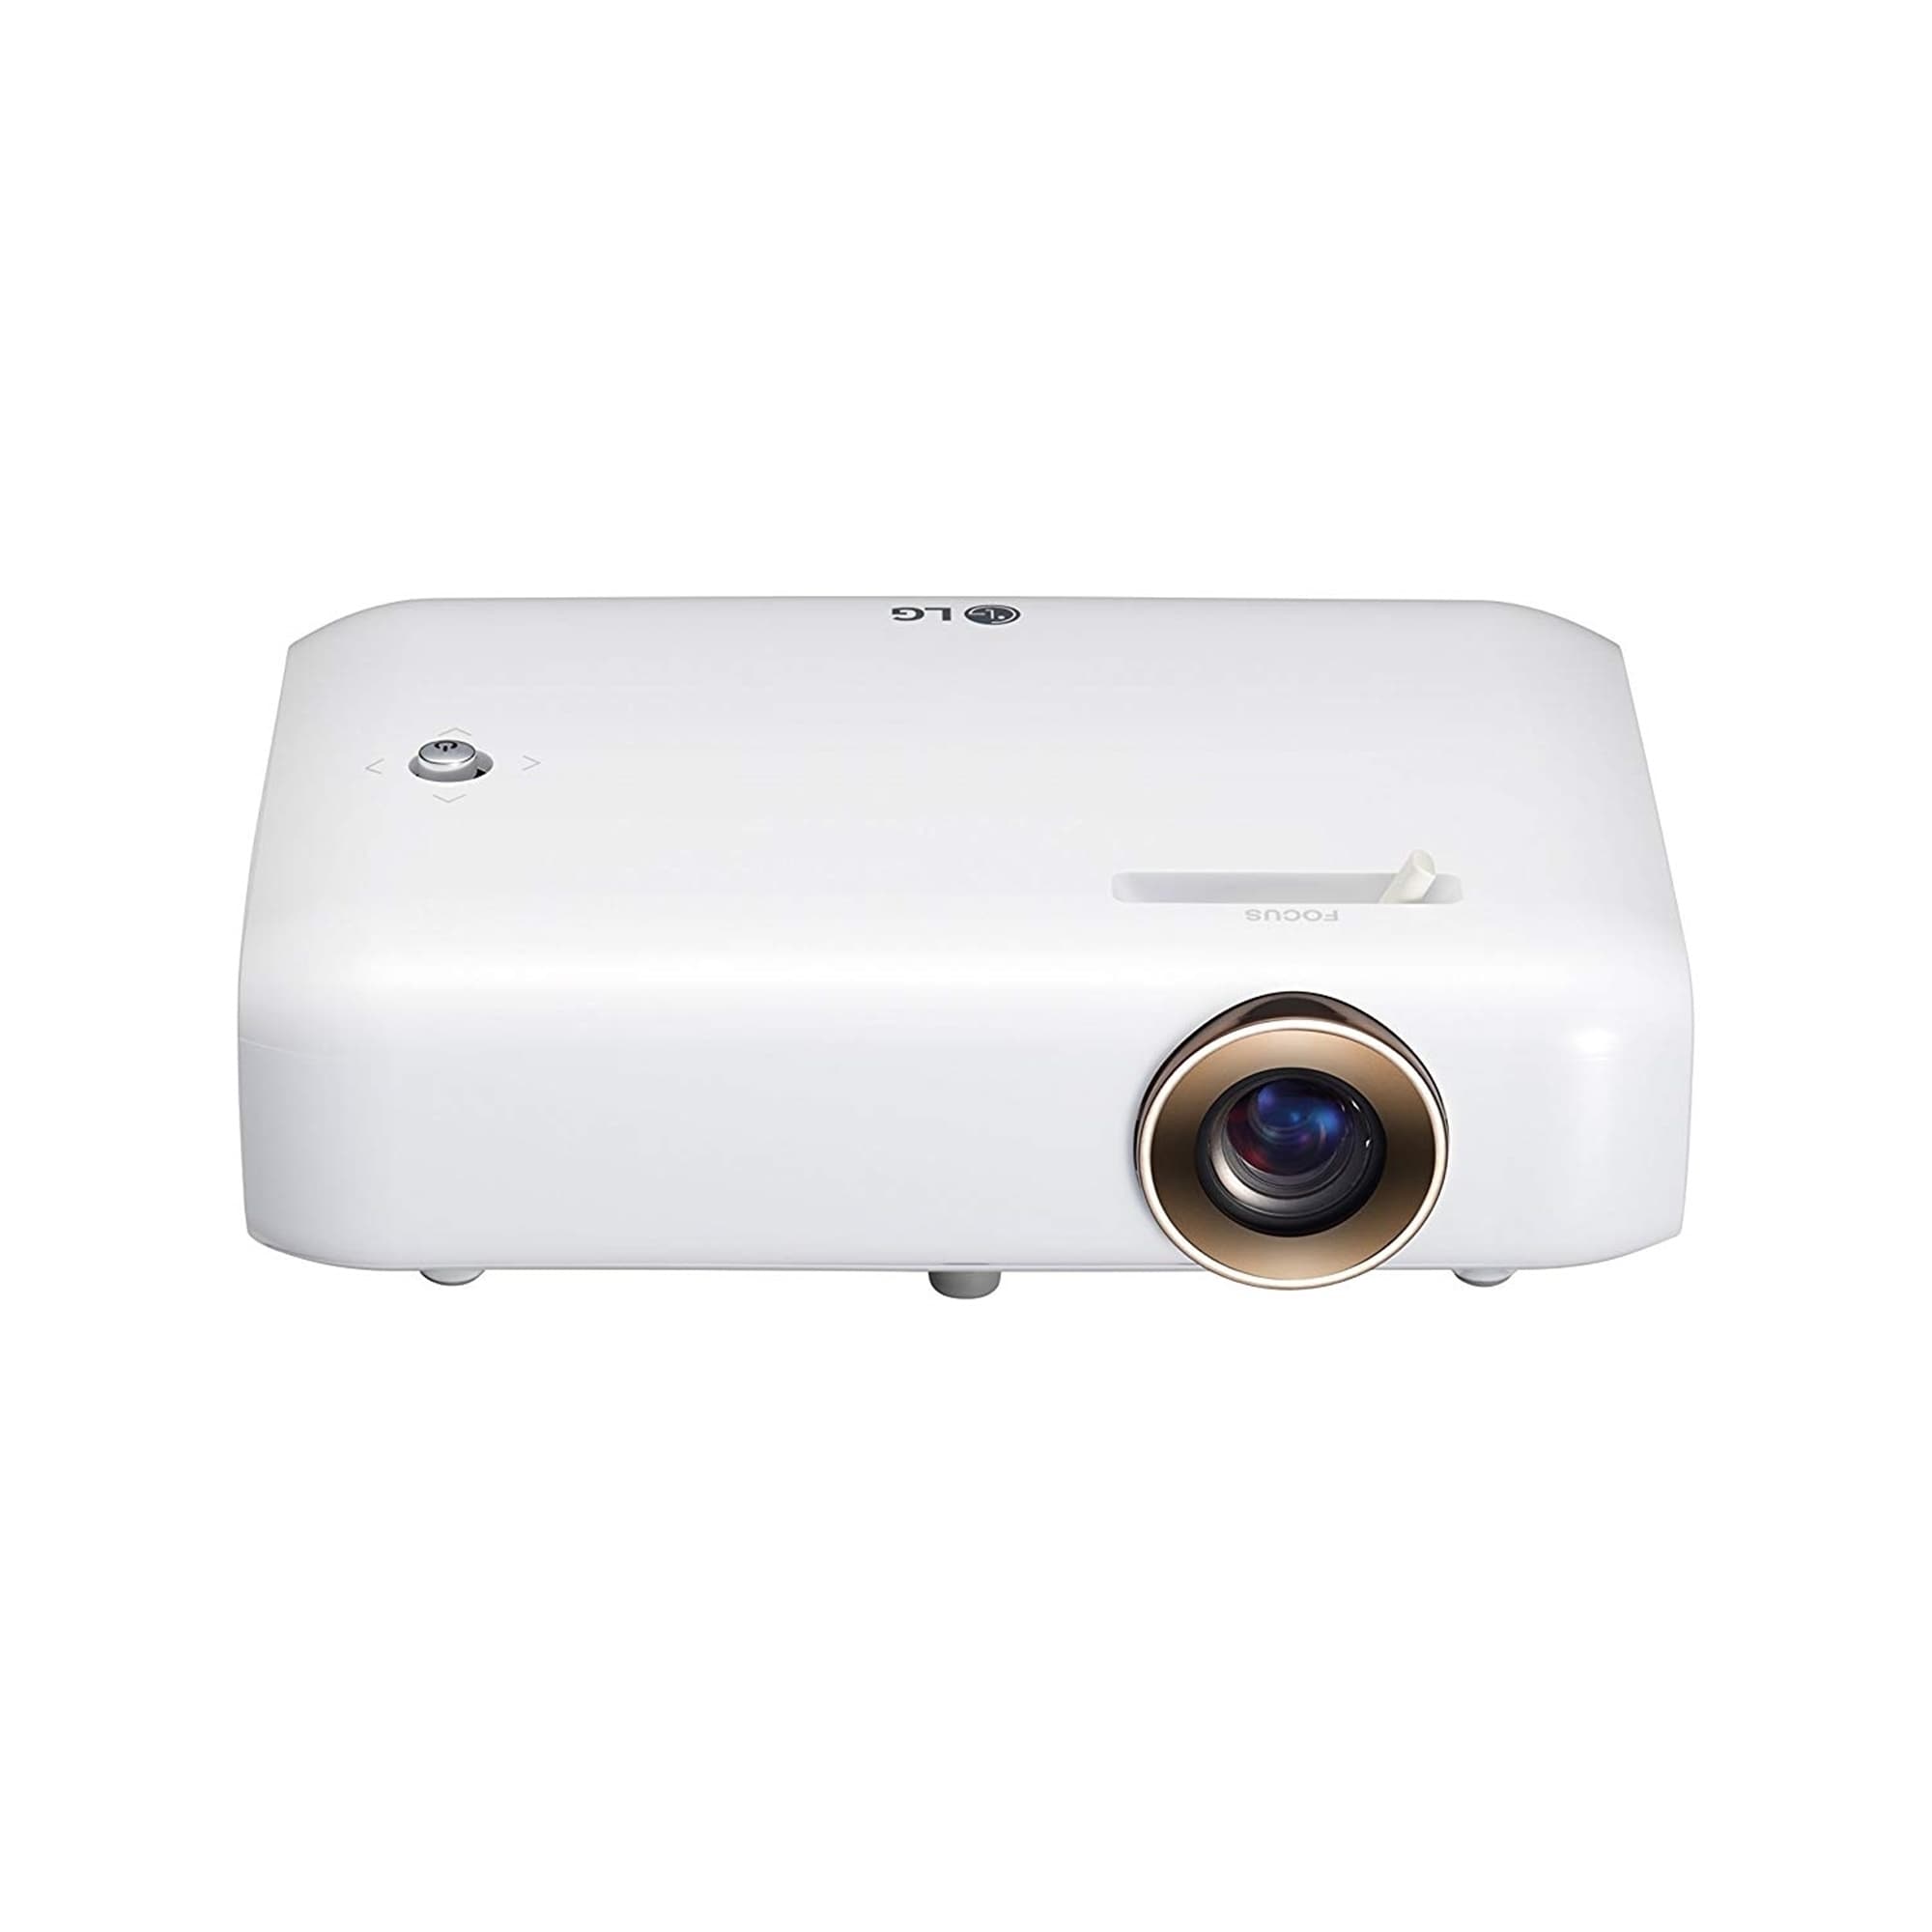 LG ElectronicsPH510P550-Lumen HD (1280x720) LCD Projector, White (New Open Box) - 6.9 x 1.7 x 4.3 in